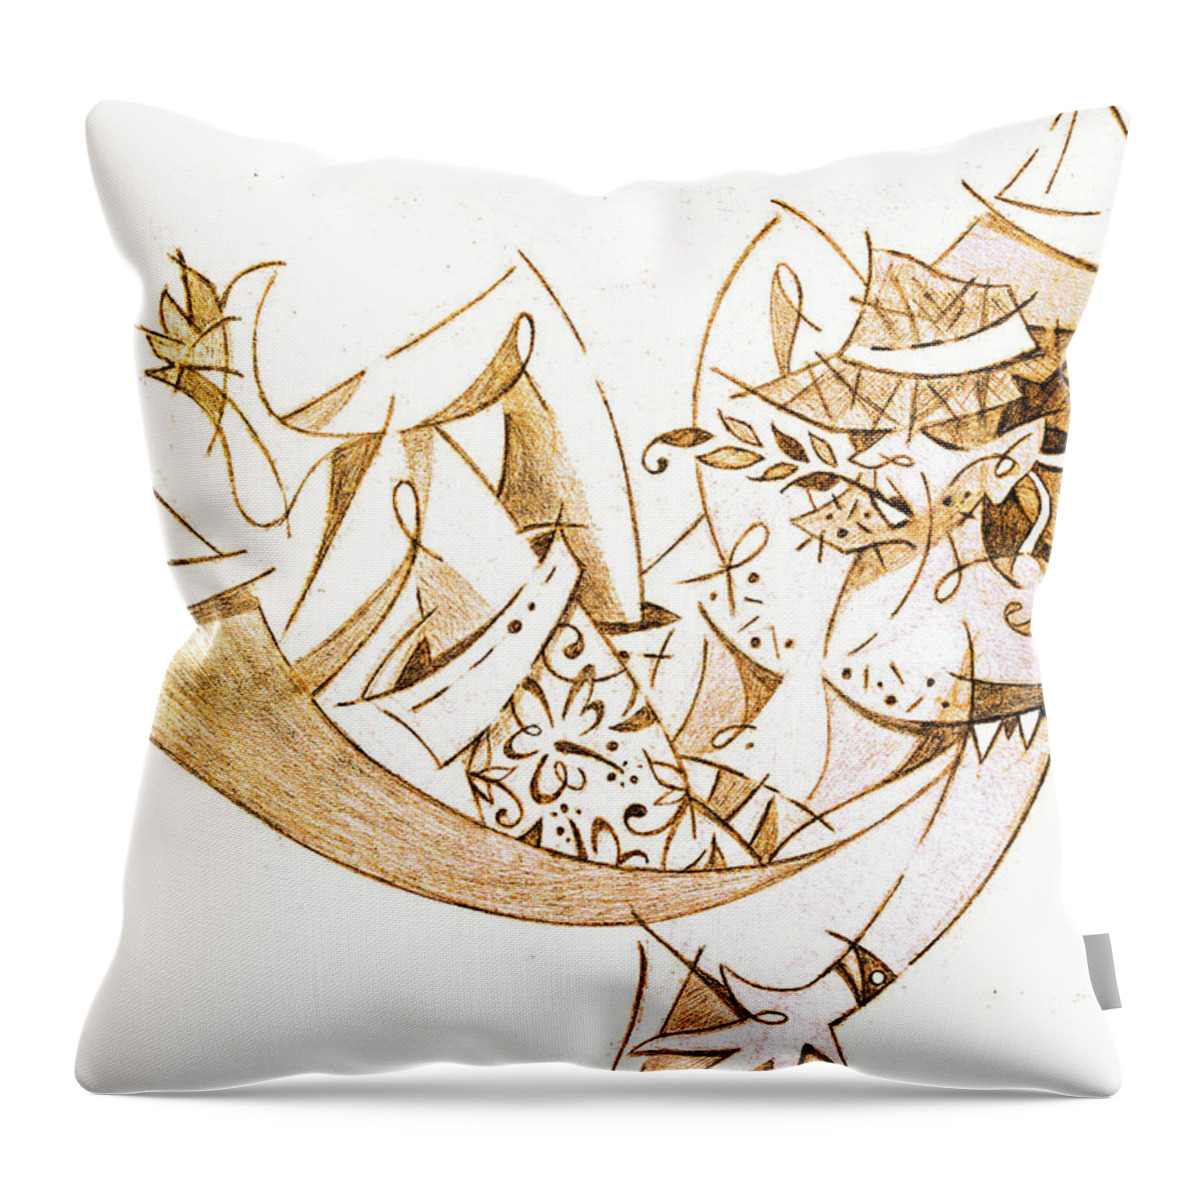 Relax Throw Pillow featuring the drawing Relaxing Summer - Holiday Man Illustration by Arte Venezia